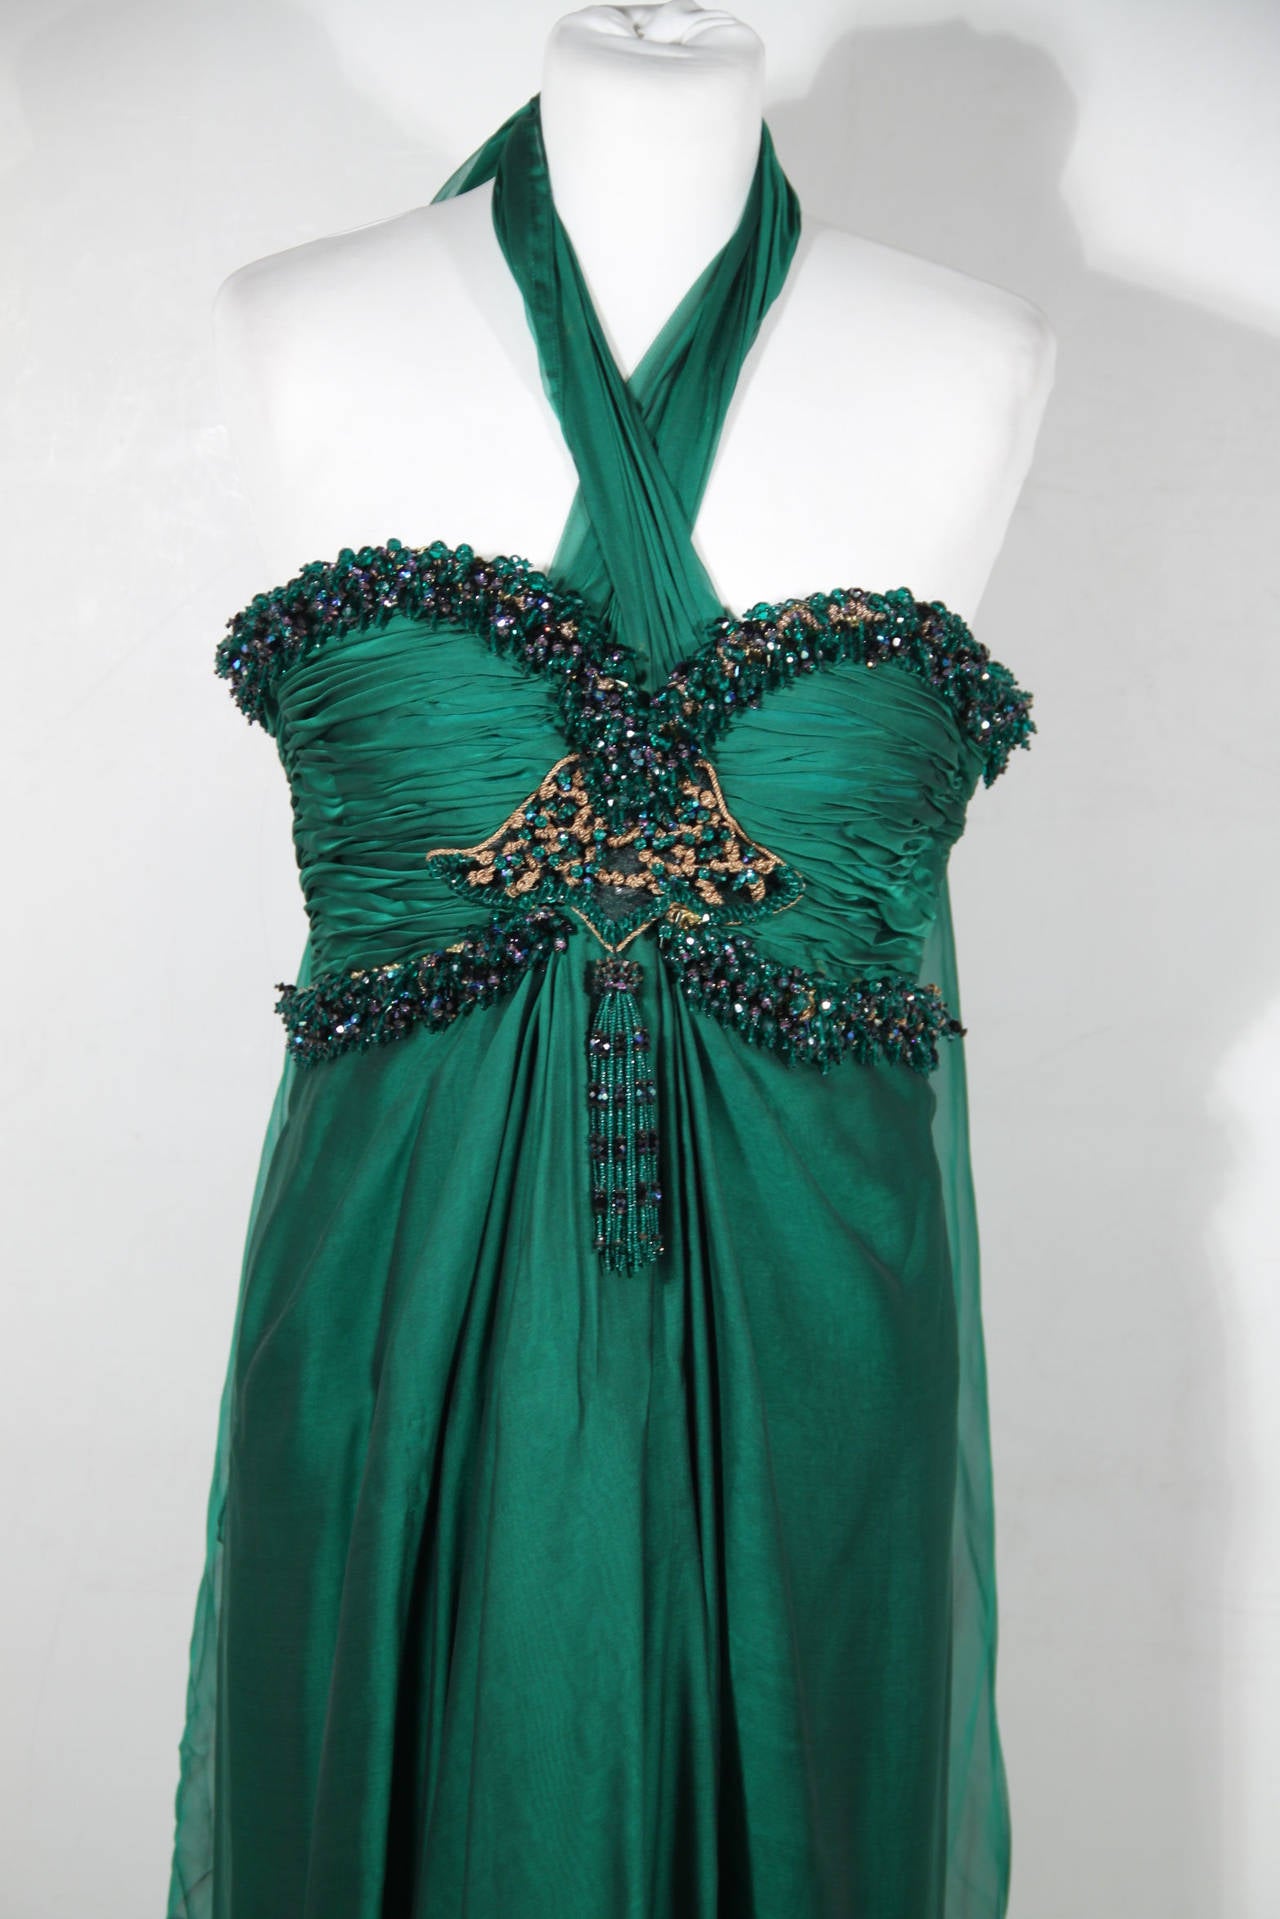 ODICINI COUTURE VINTAGE Green Silk MAXI DRESS Gown w/ Embellished Bustier 2